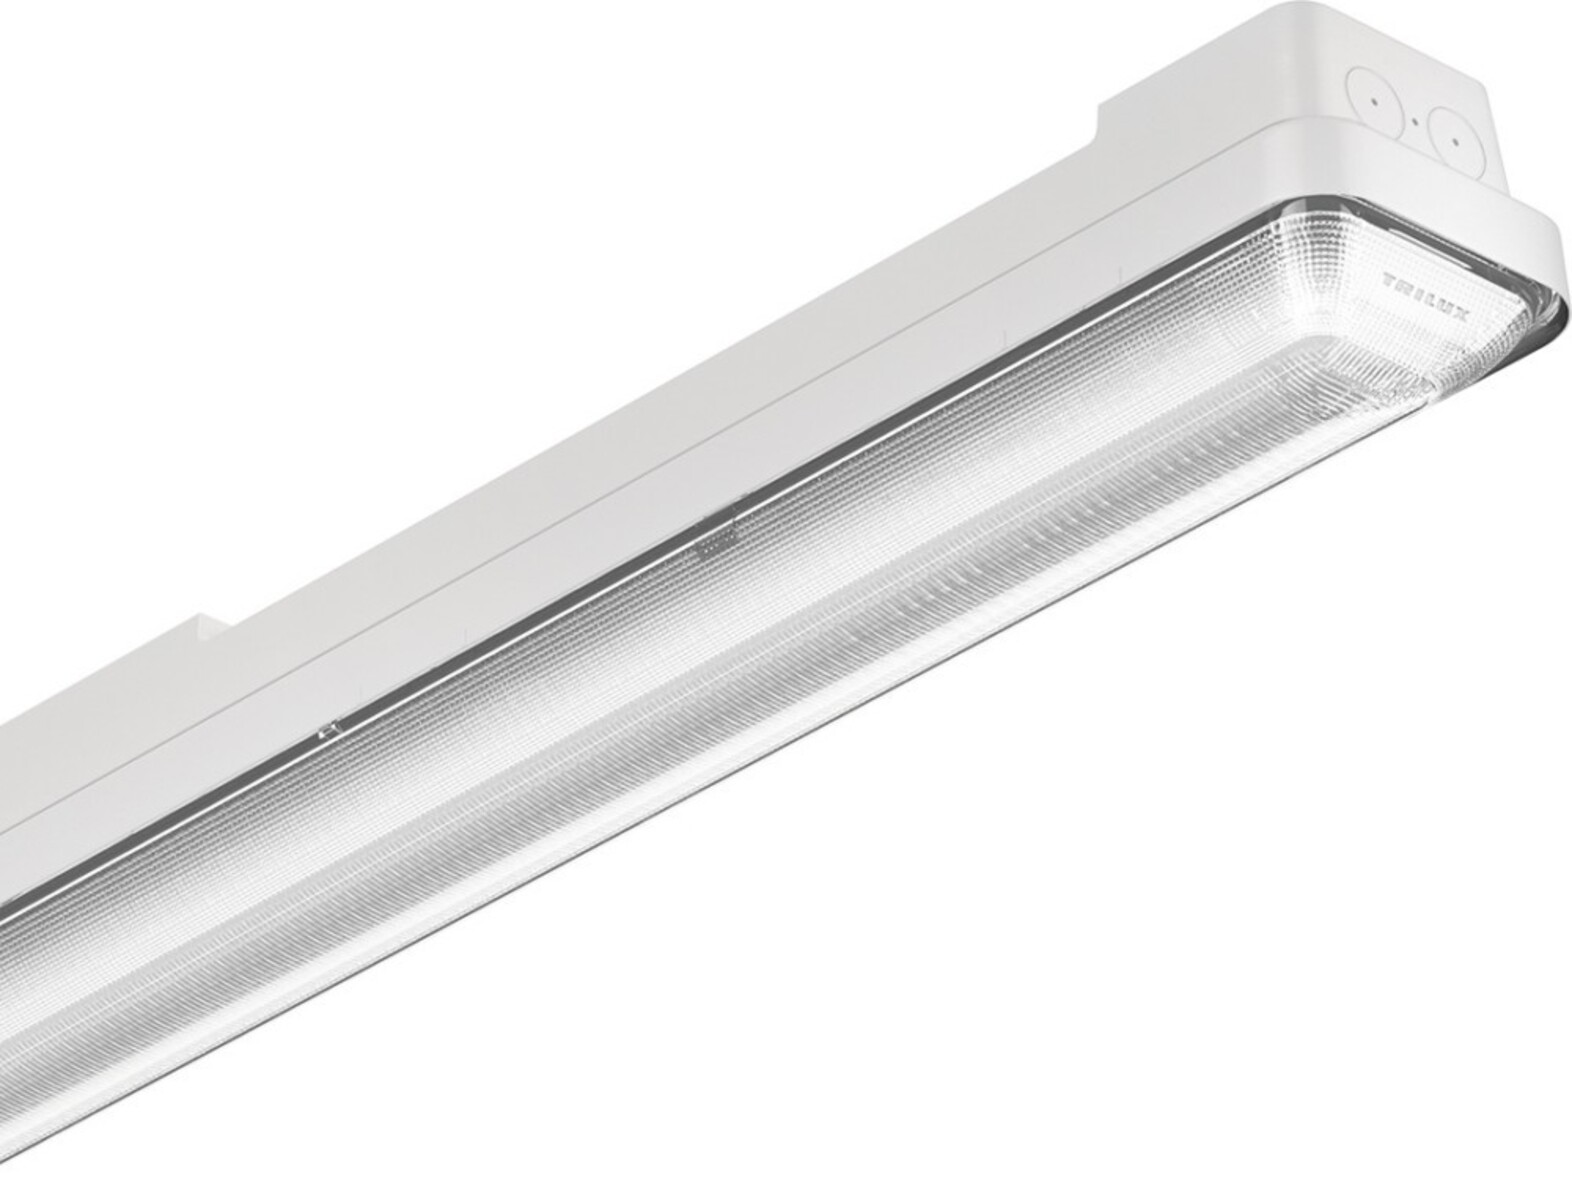 B40 Trilux 2310 LED-Feuchtraumleuchte 7922740 12